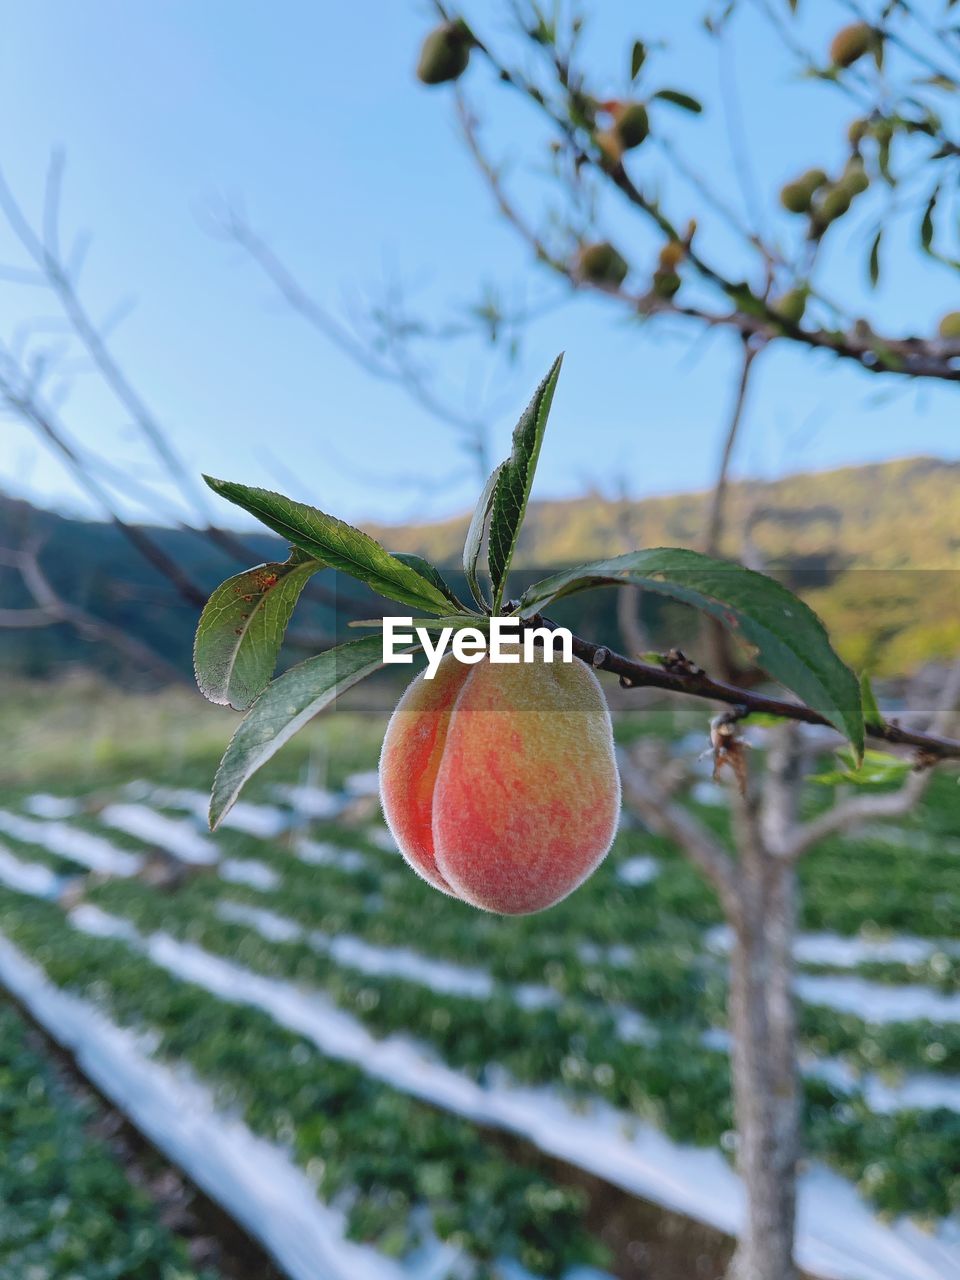 food, fruit, food and drink, branch, healthy eating, tree, plant, flower, nature, leaf, freshness, no people, agriculture, produce, growth, focus on foreground, wellbeing, fruit tree, day, plant part, outdoors, sky, blossom, close-up, beauty in nature, landscape, rural scene, orchard, ripe